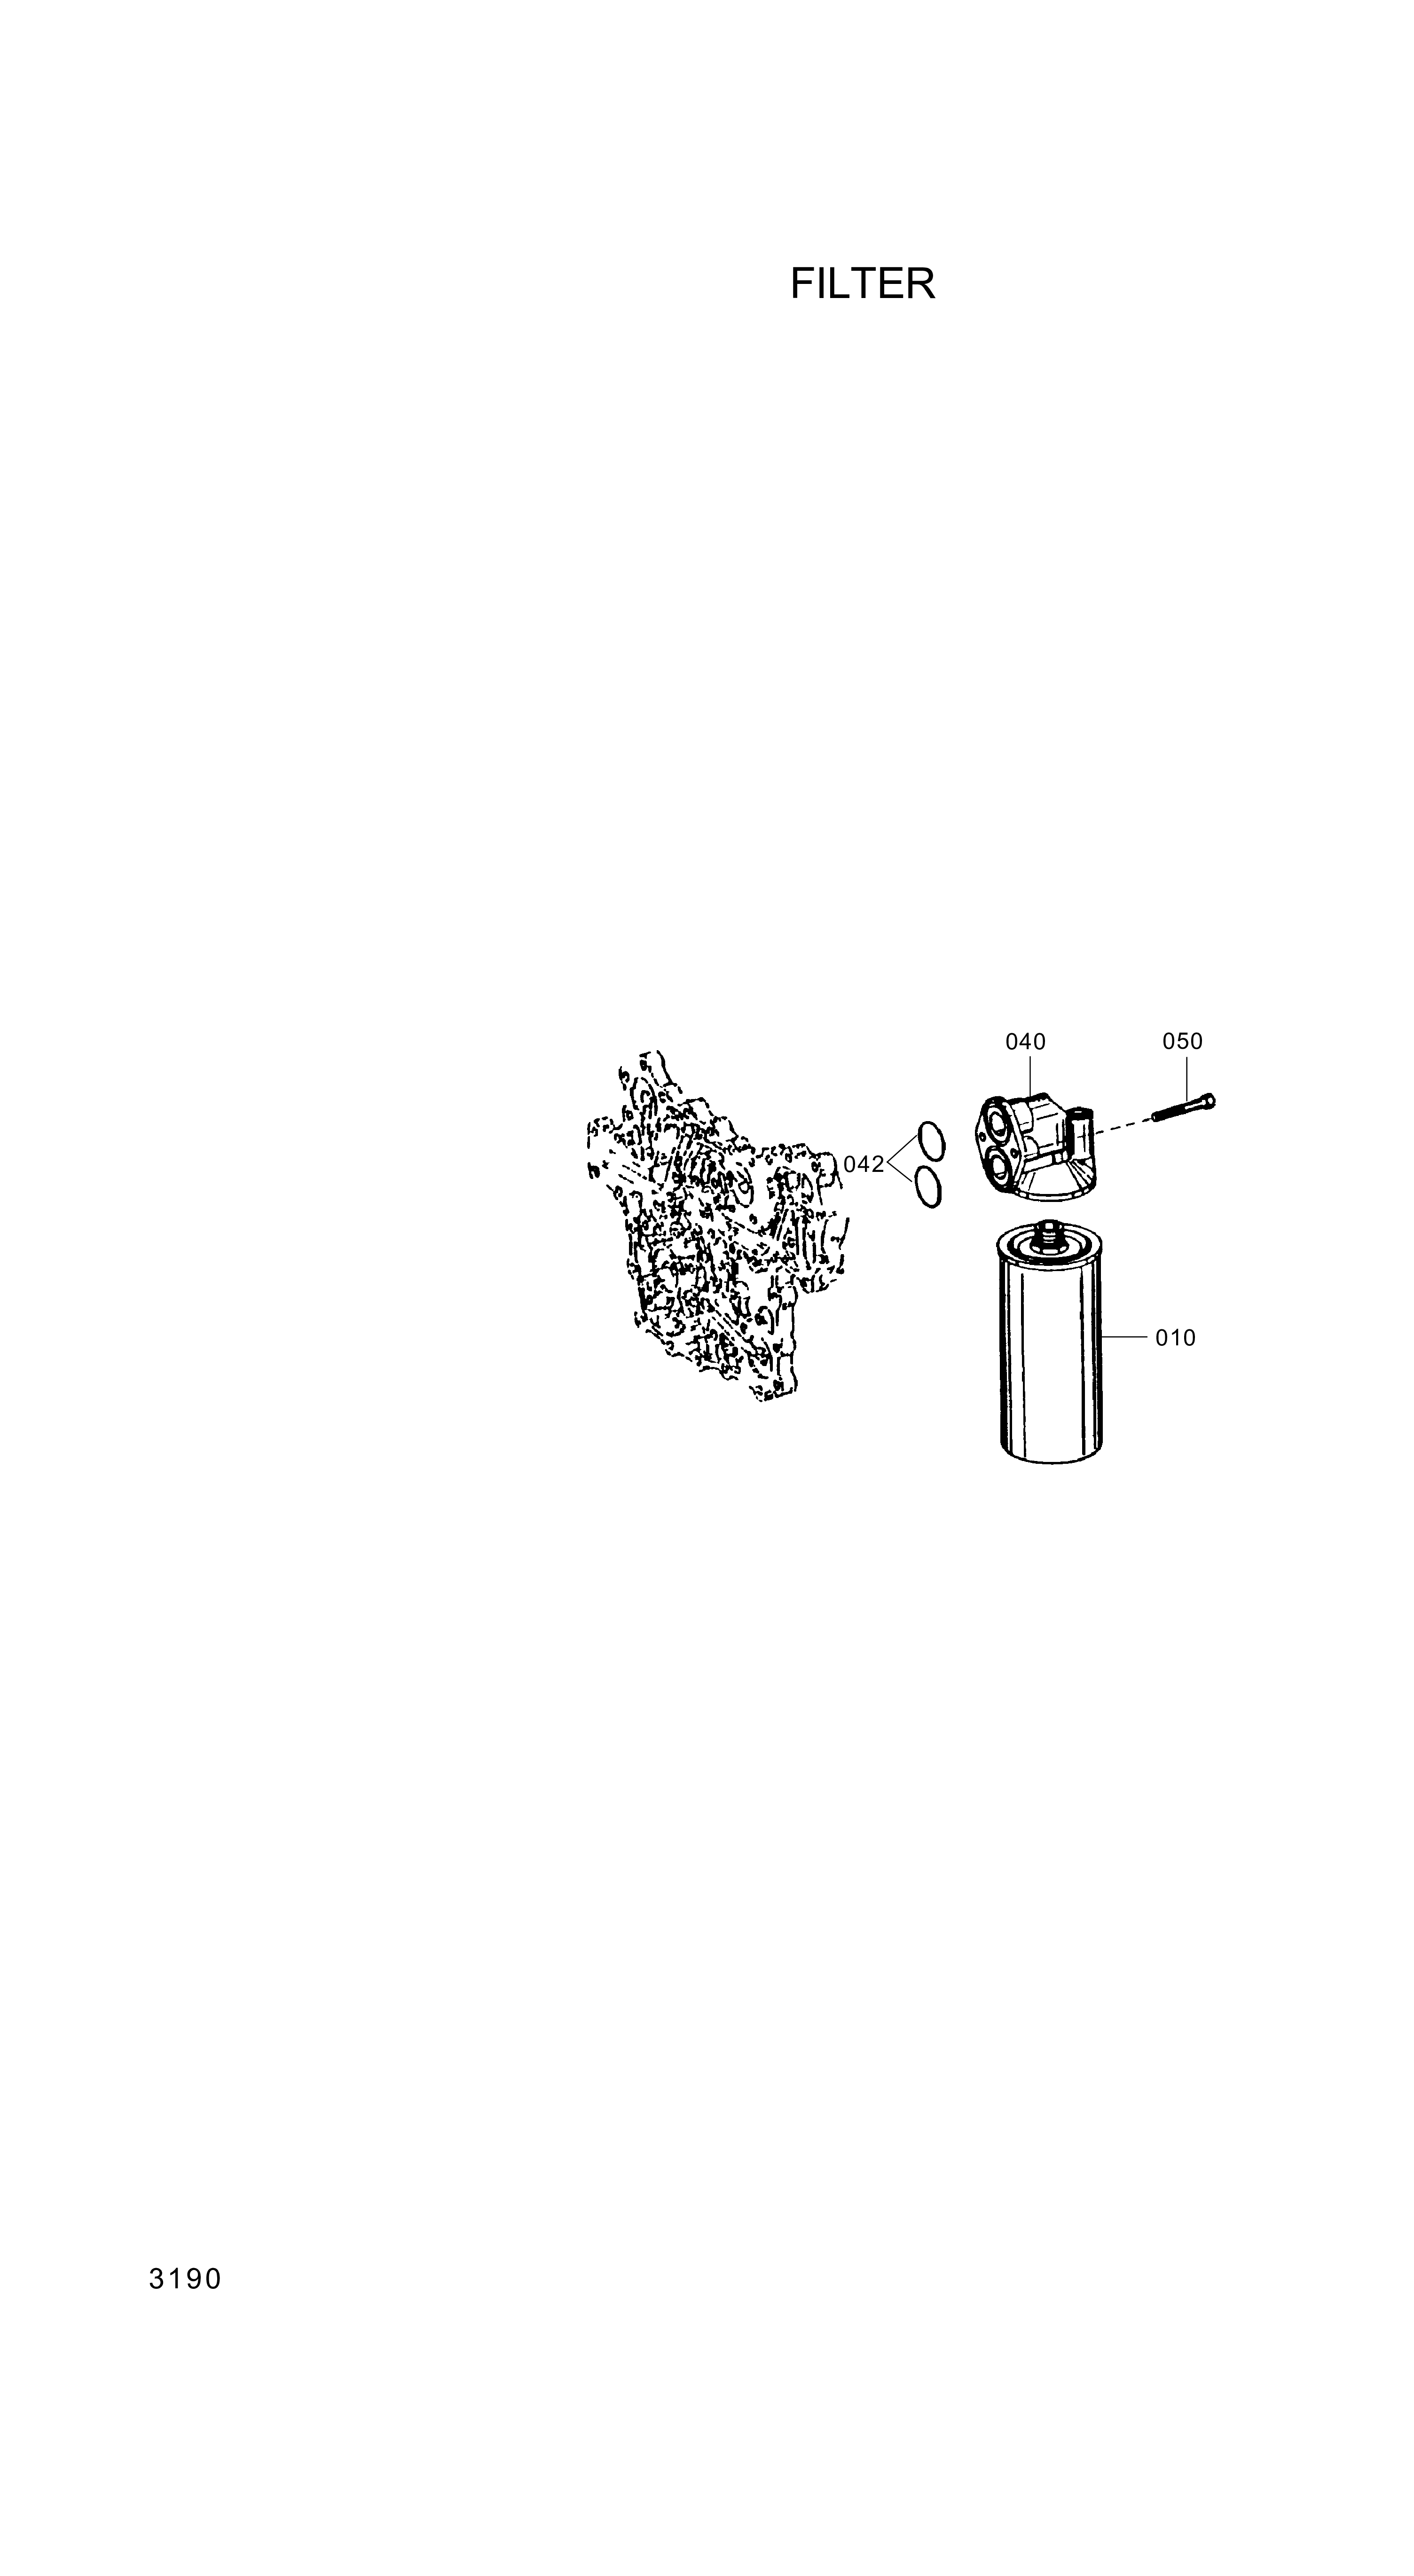 drawing for Hyundai Construction Equipment 0750131060 - EXCHANGE FILTER (figure 3)